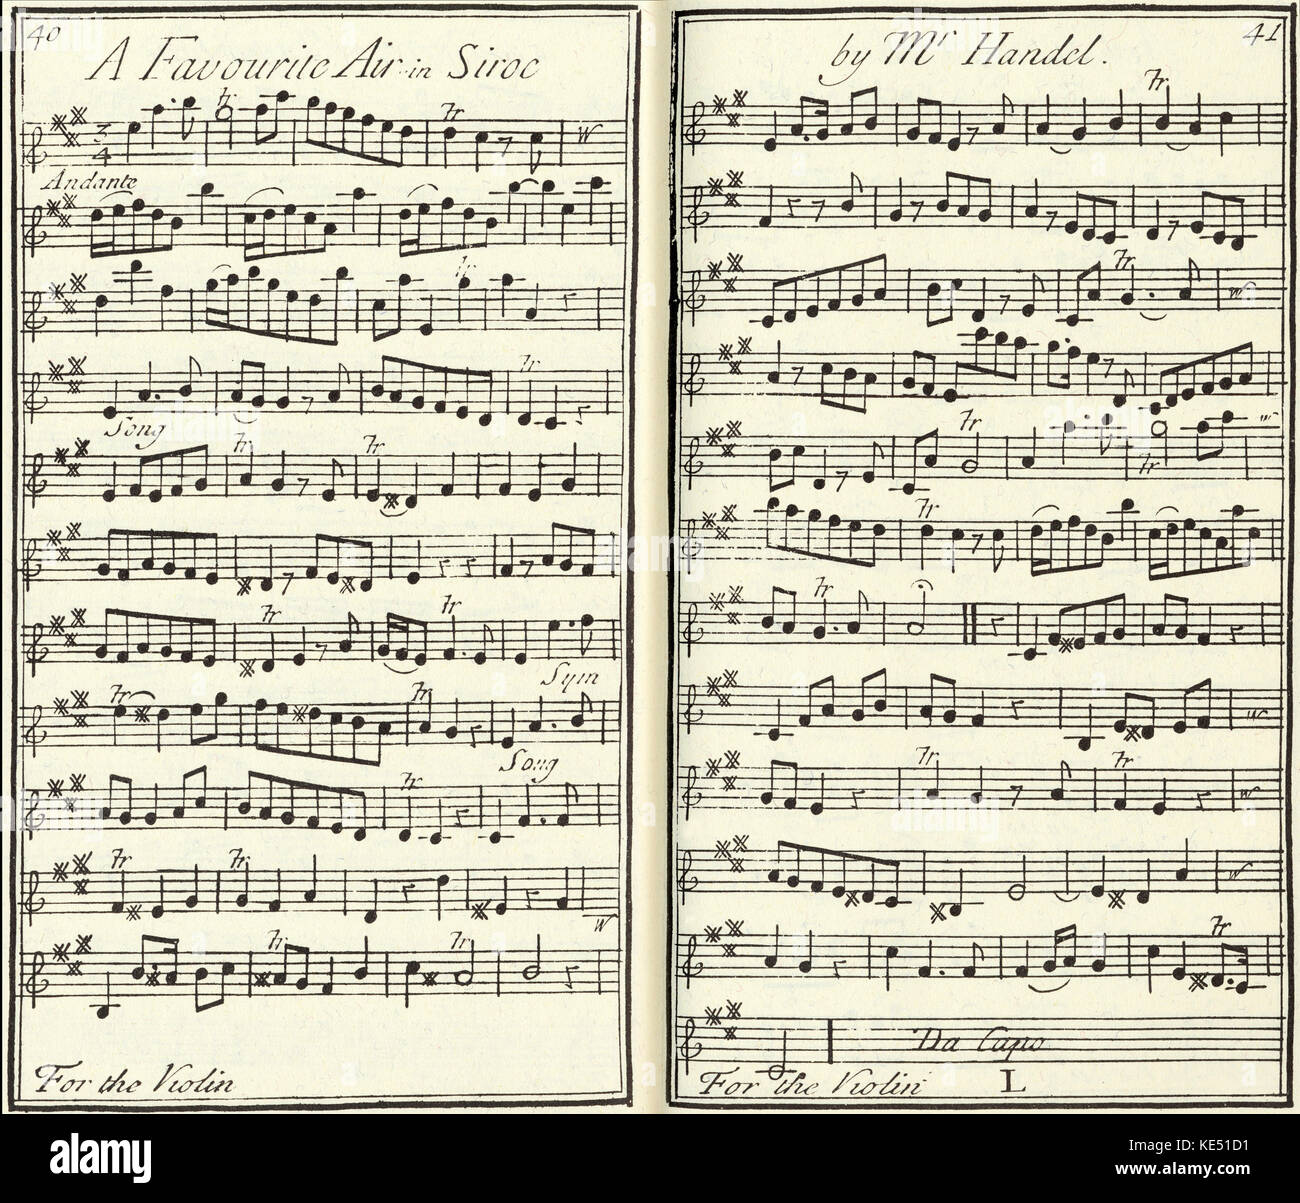 Handel 's operea Siroc ,  music score for the violin,   p40-41-' A favourite air in Siroc, by Mr Handel. '  published in London, 1731. George Frideric Handel, German composer: 23 February 1685 – 14 April 1759 Stock Photo